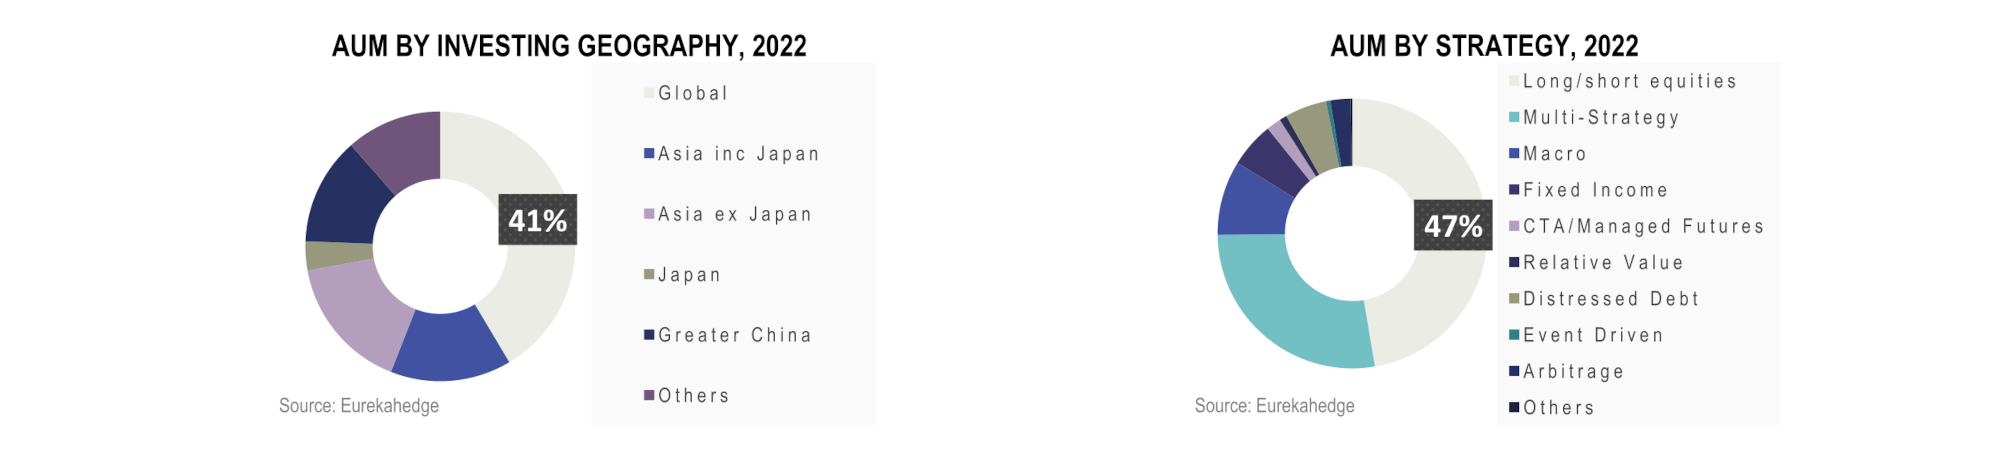 Asian Hedge Funds Infographic February 2022 - AUM by investing Geography